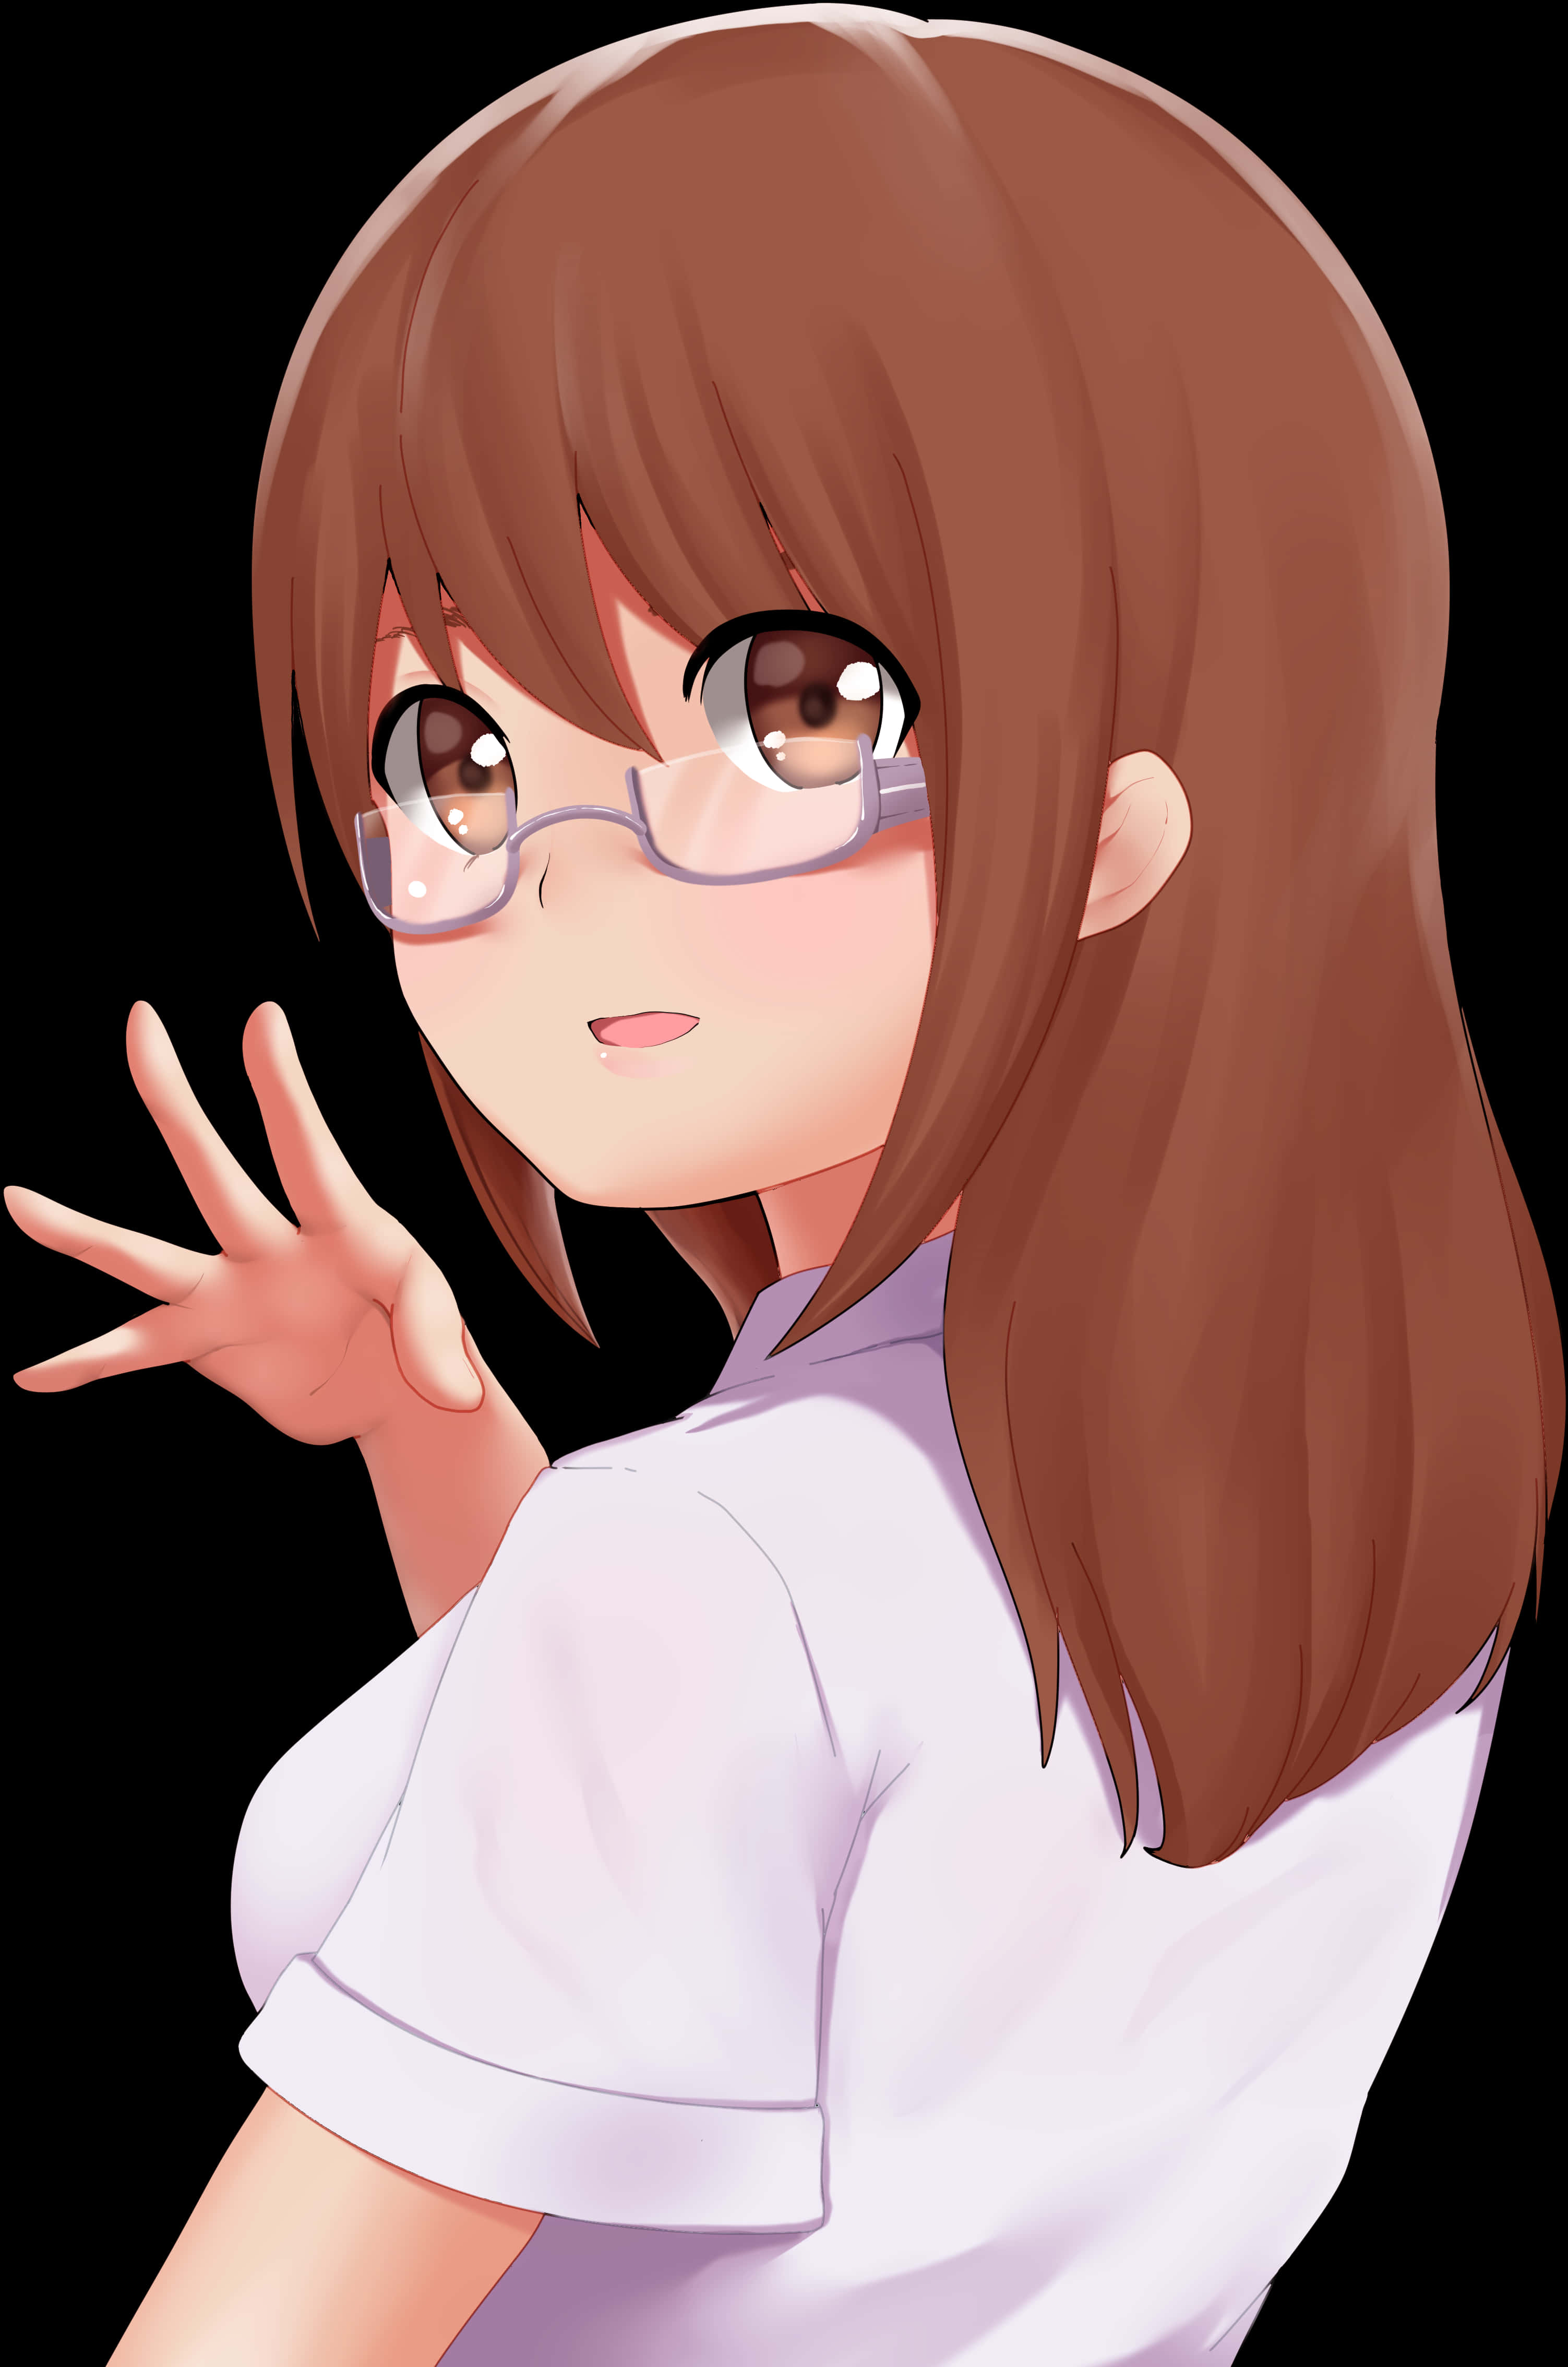 Anime Girl With Glasses Gesture PNG